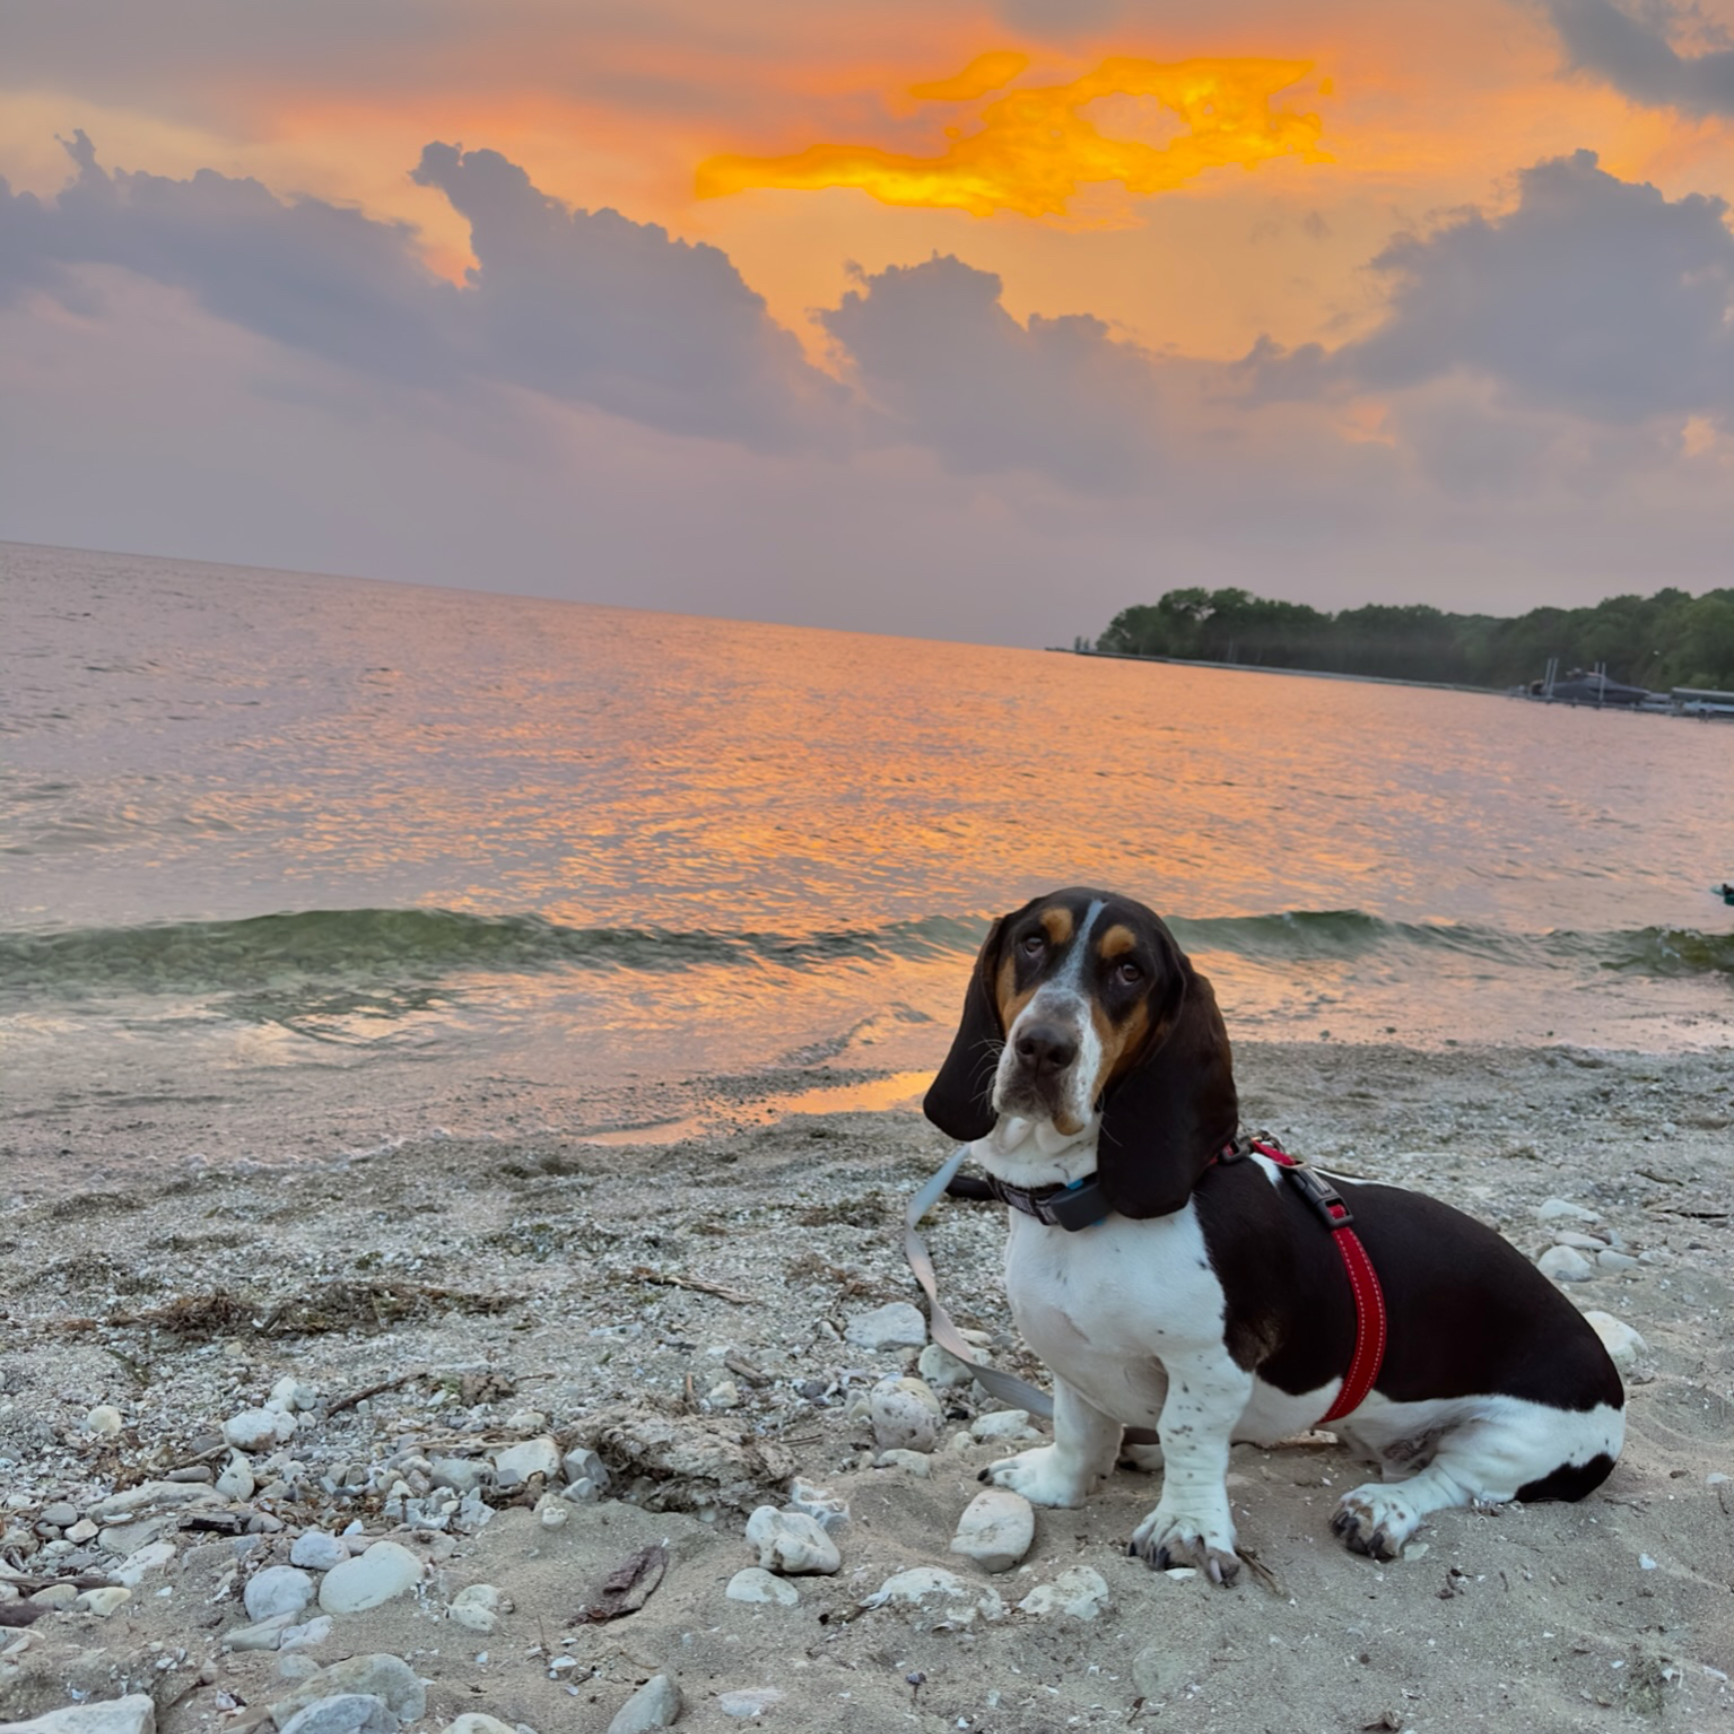 2023 was the year of travel for our dog Winona. She made it to 4 states and even Canada! Here she is pictured in Wisconsin on Sturgeon Bay.